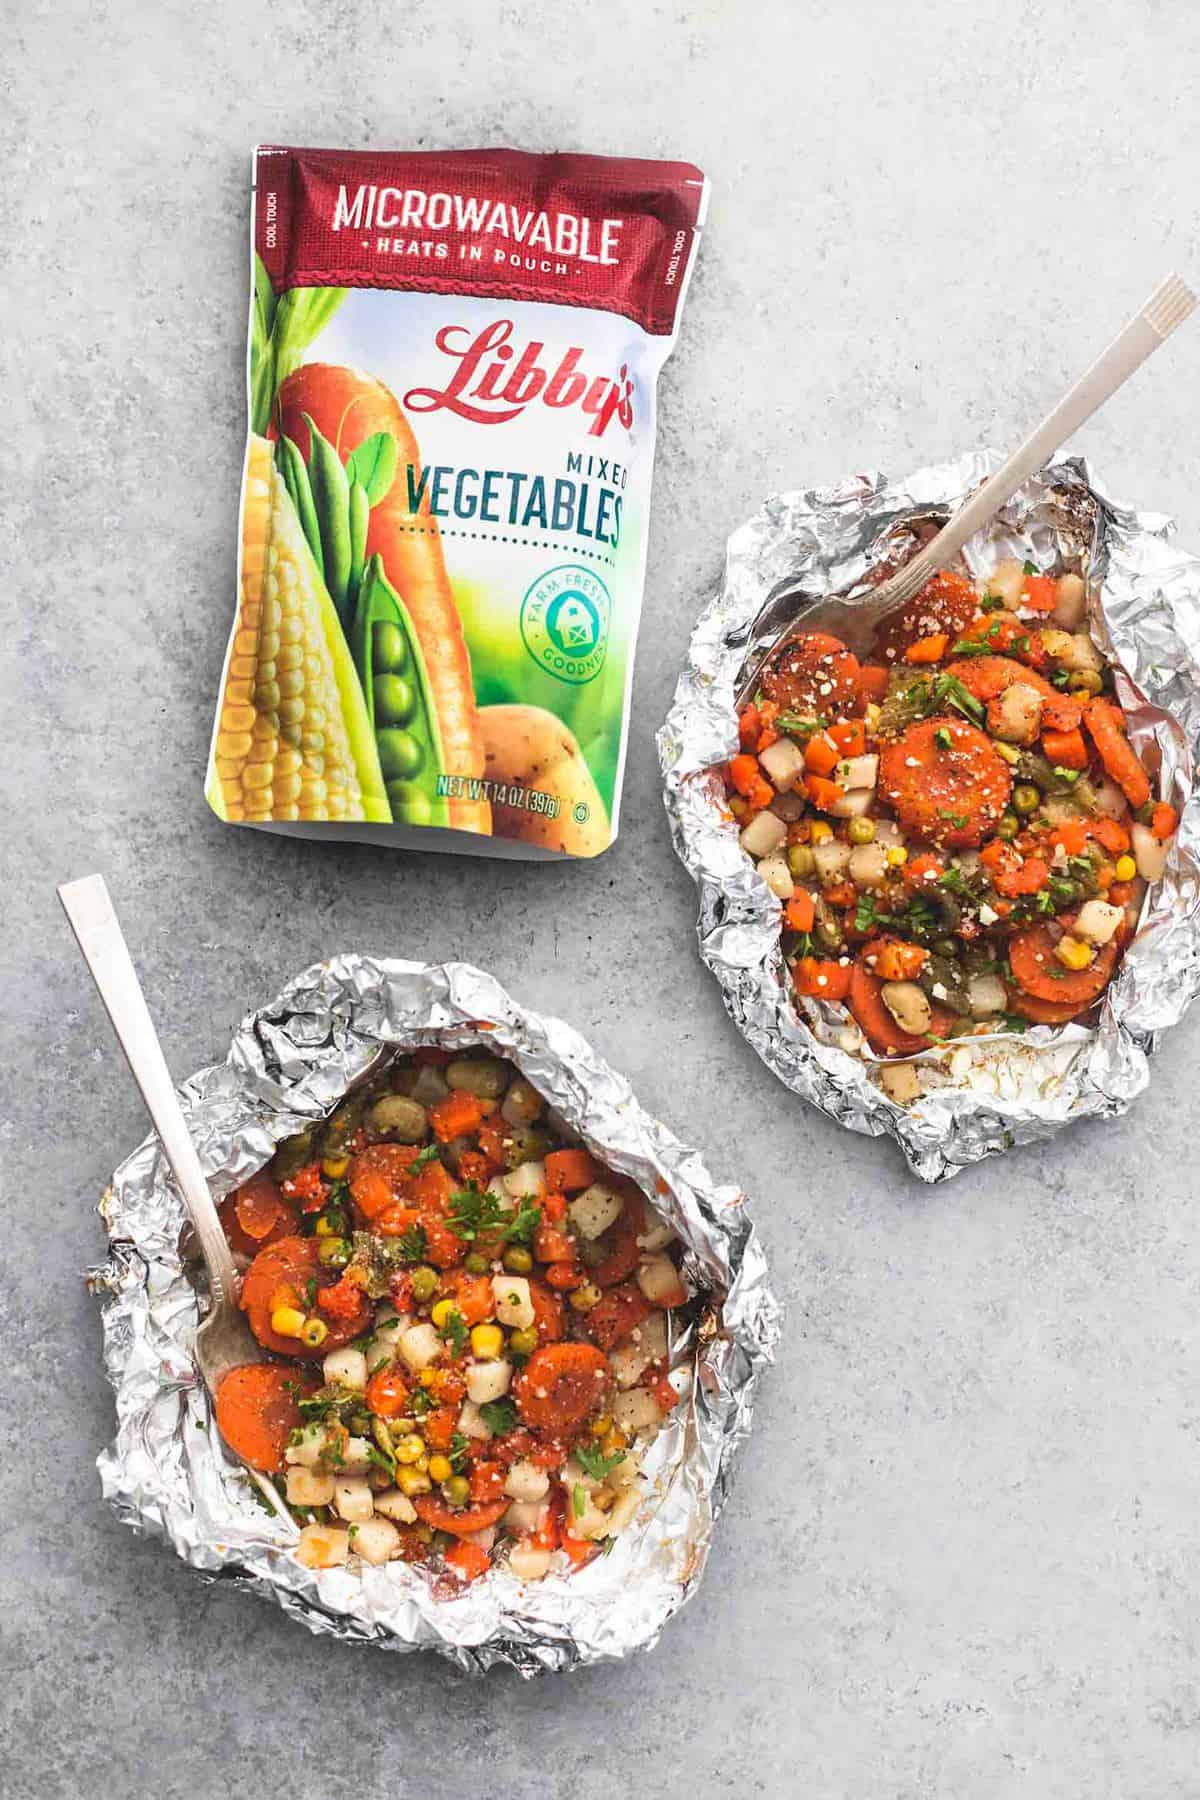 top view of vegetable medley foil packs with a package of Libby's mixed vegetables on the side.